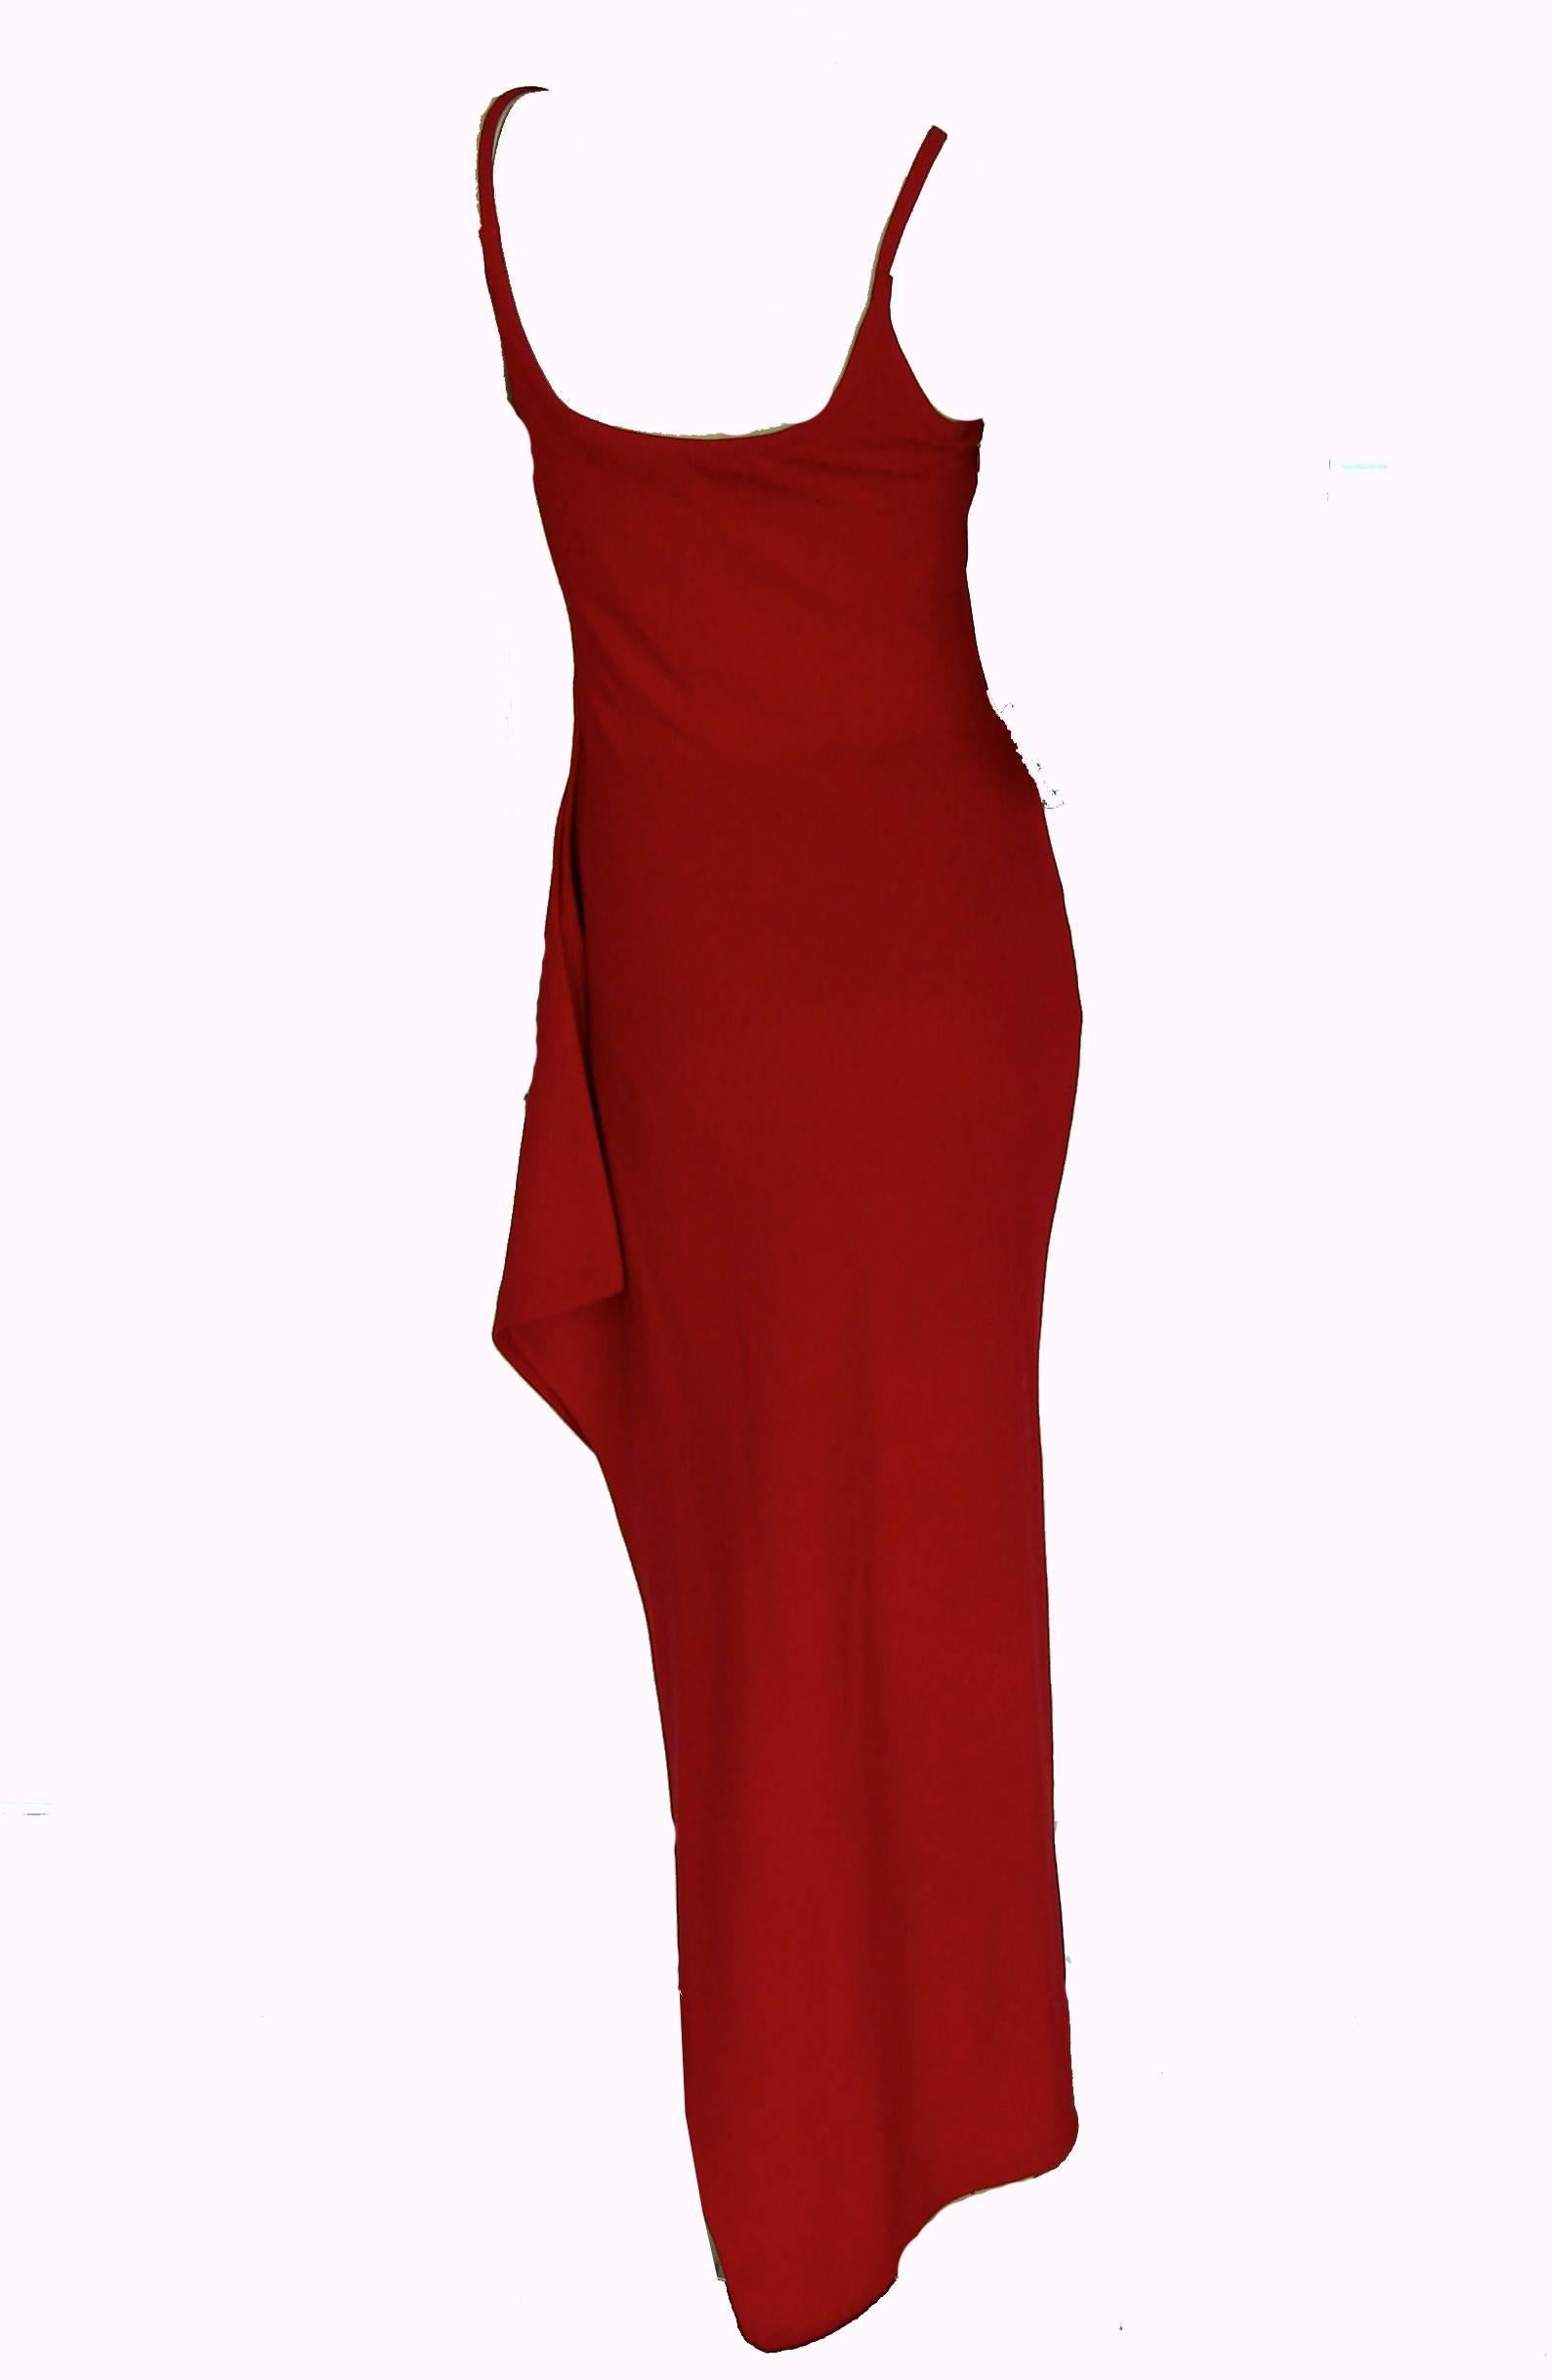 Gianni Versace Couture Red Bustier Dress Long Asymmetric Hem 1990s Sz S/M In Good Condition In Port Saint Lucie, FL